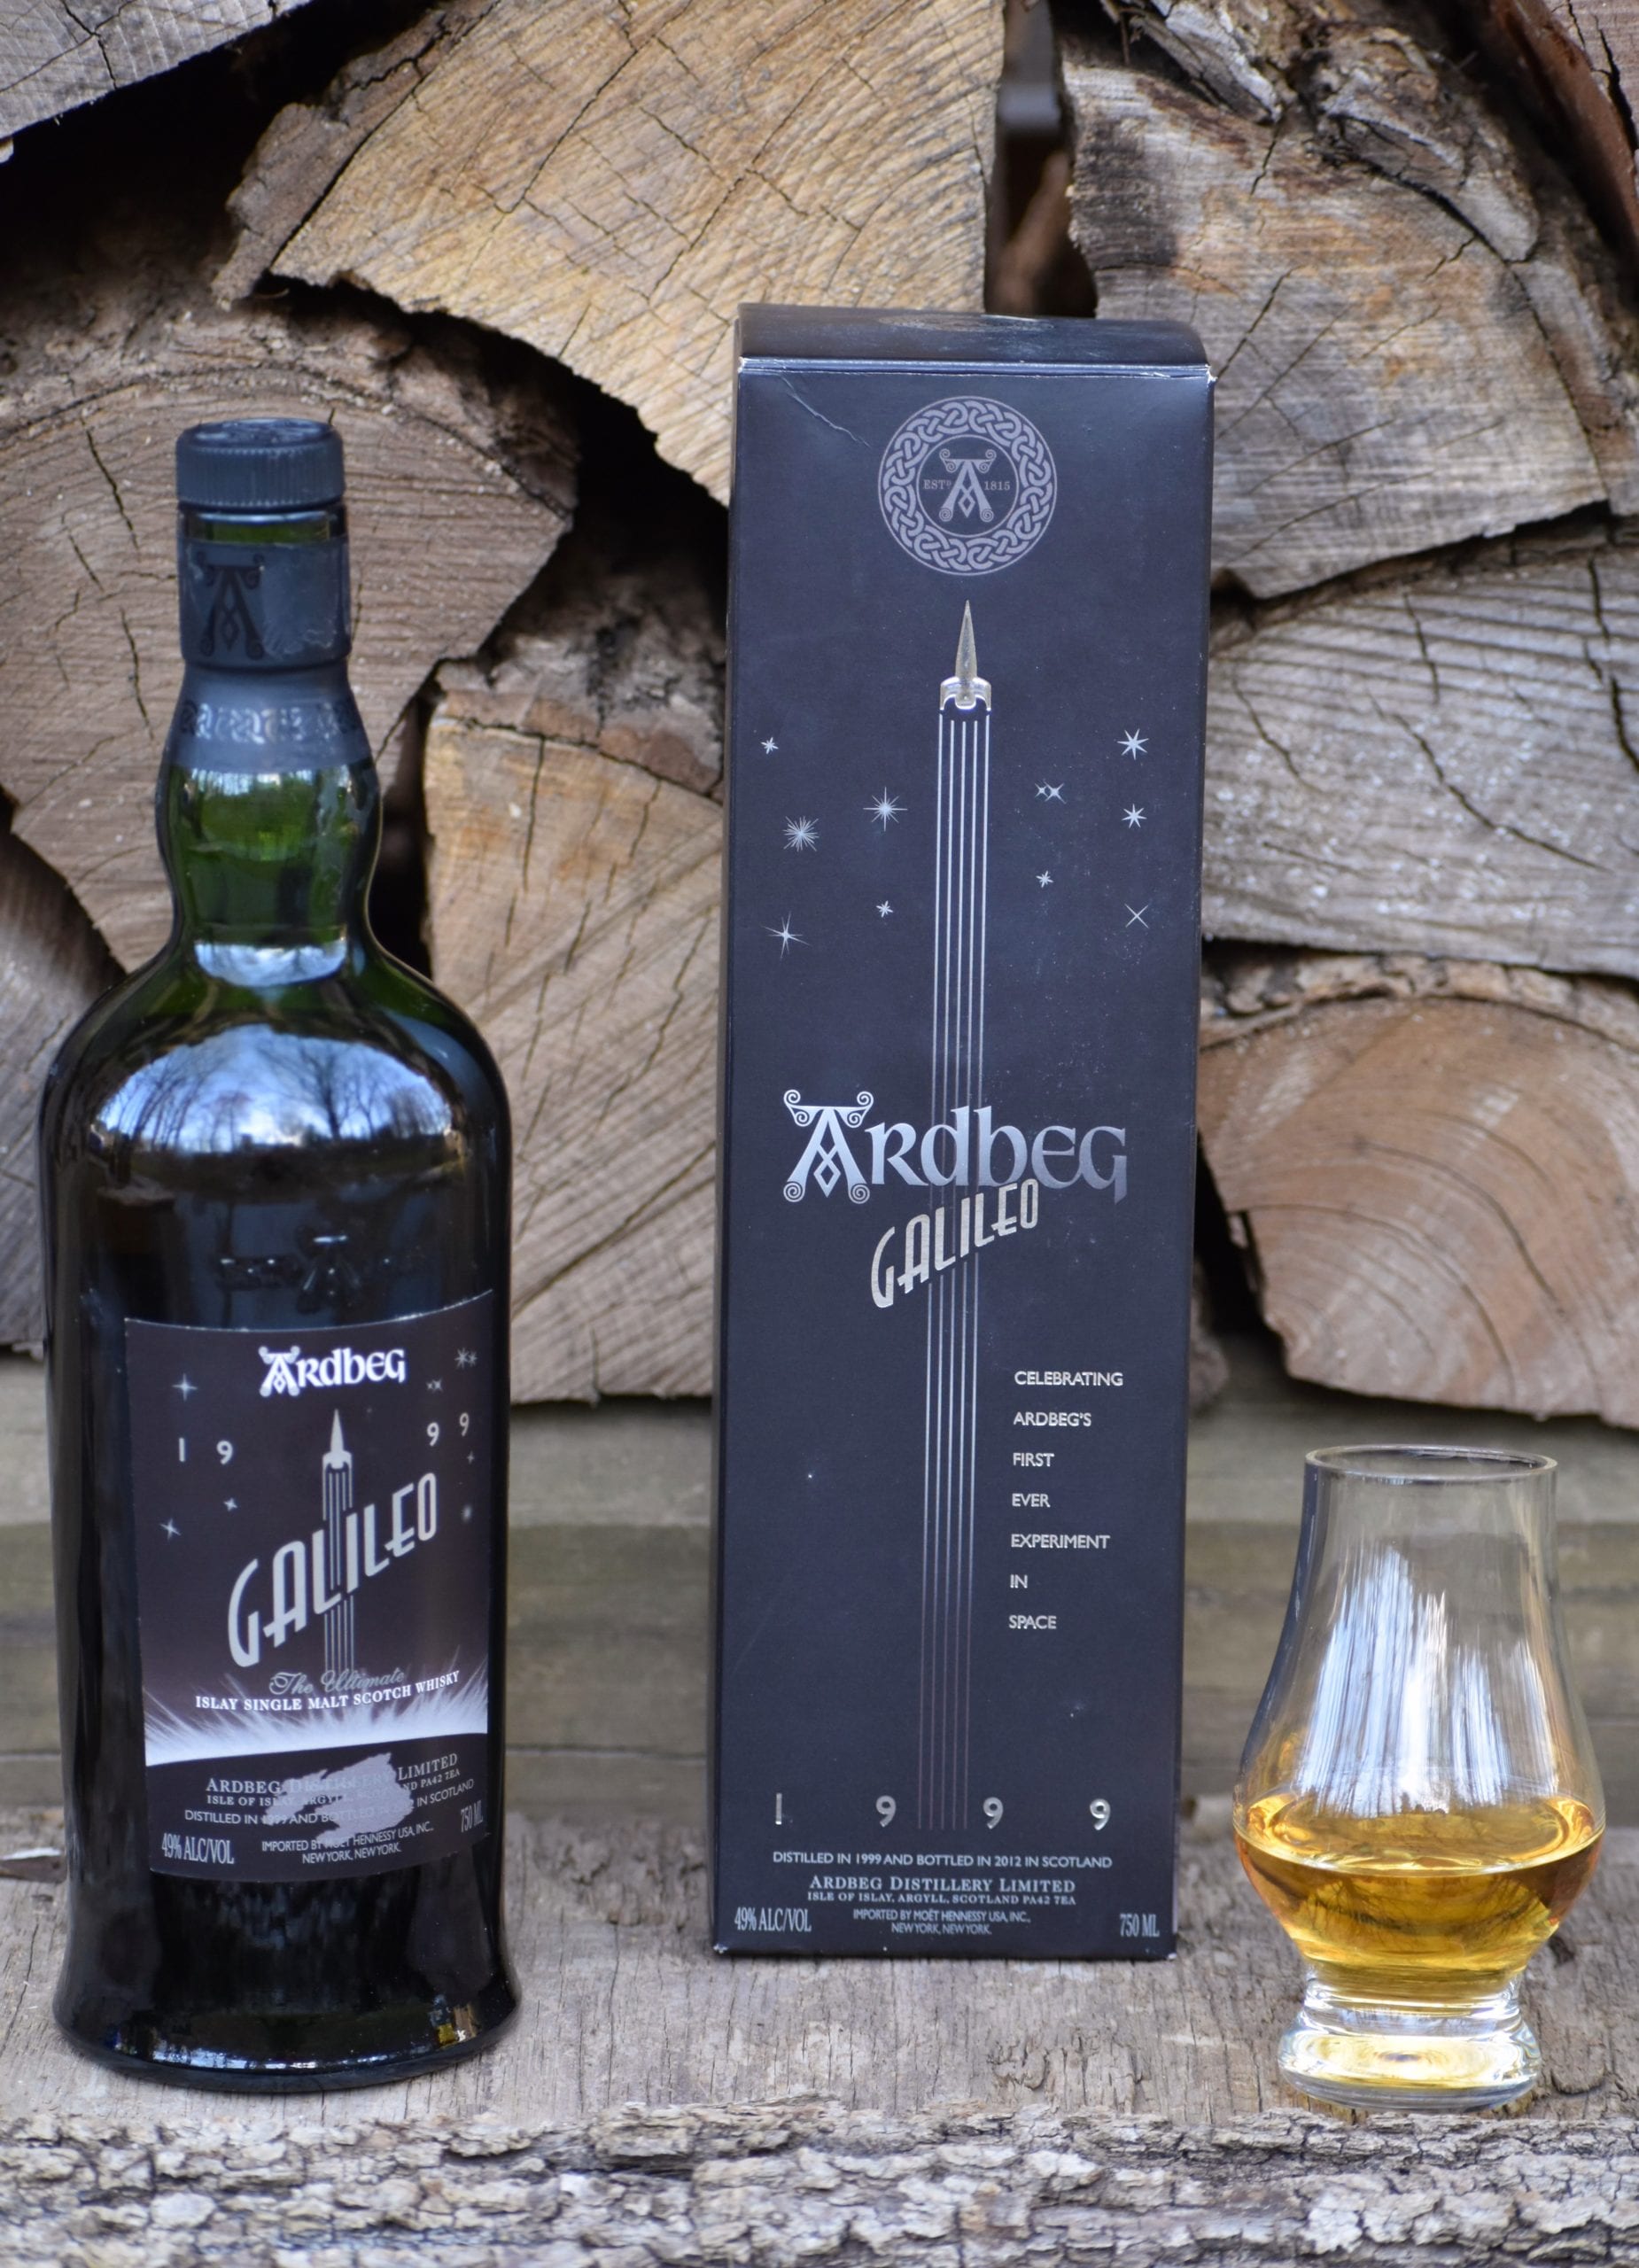 Galileo, World Champion, an amazing expression of Ardbeg celebrating the whisky maturation in space!